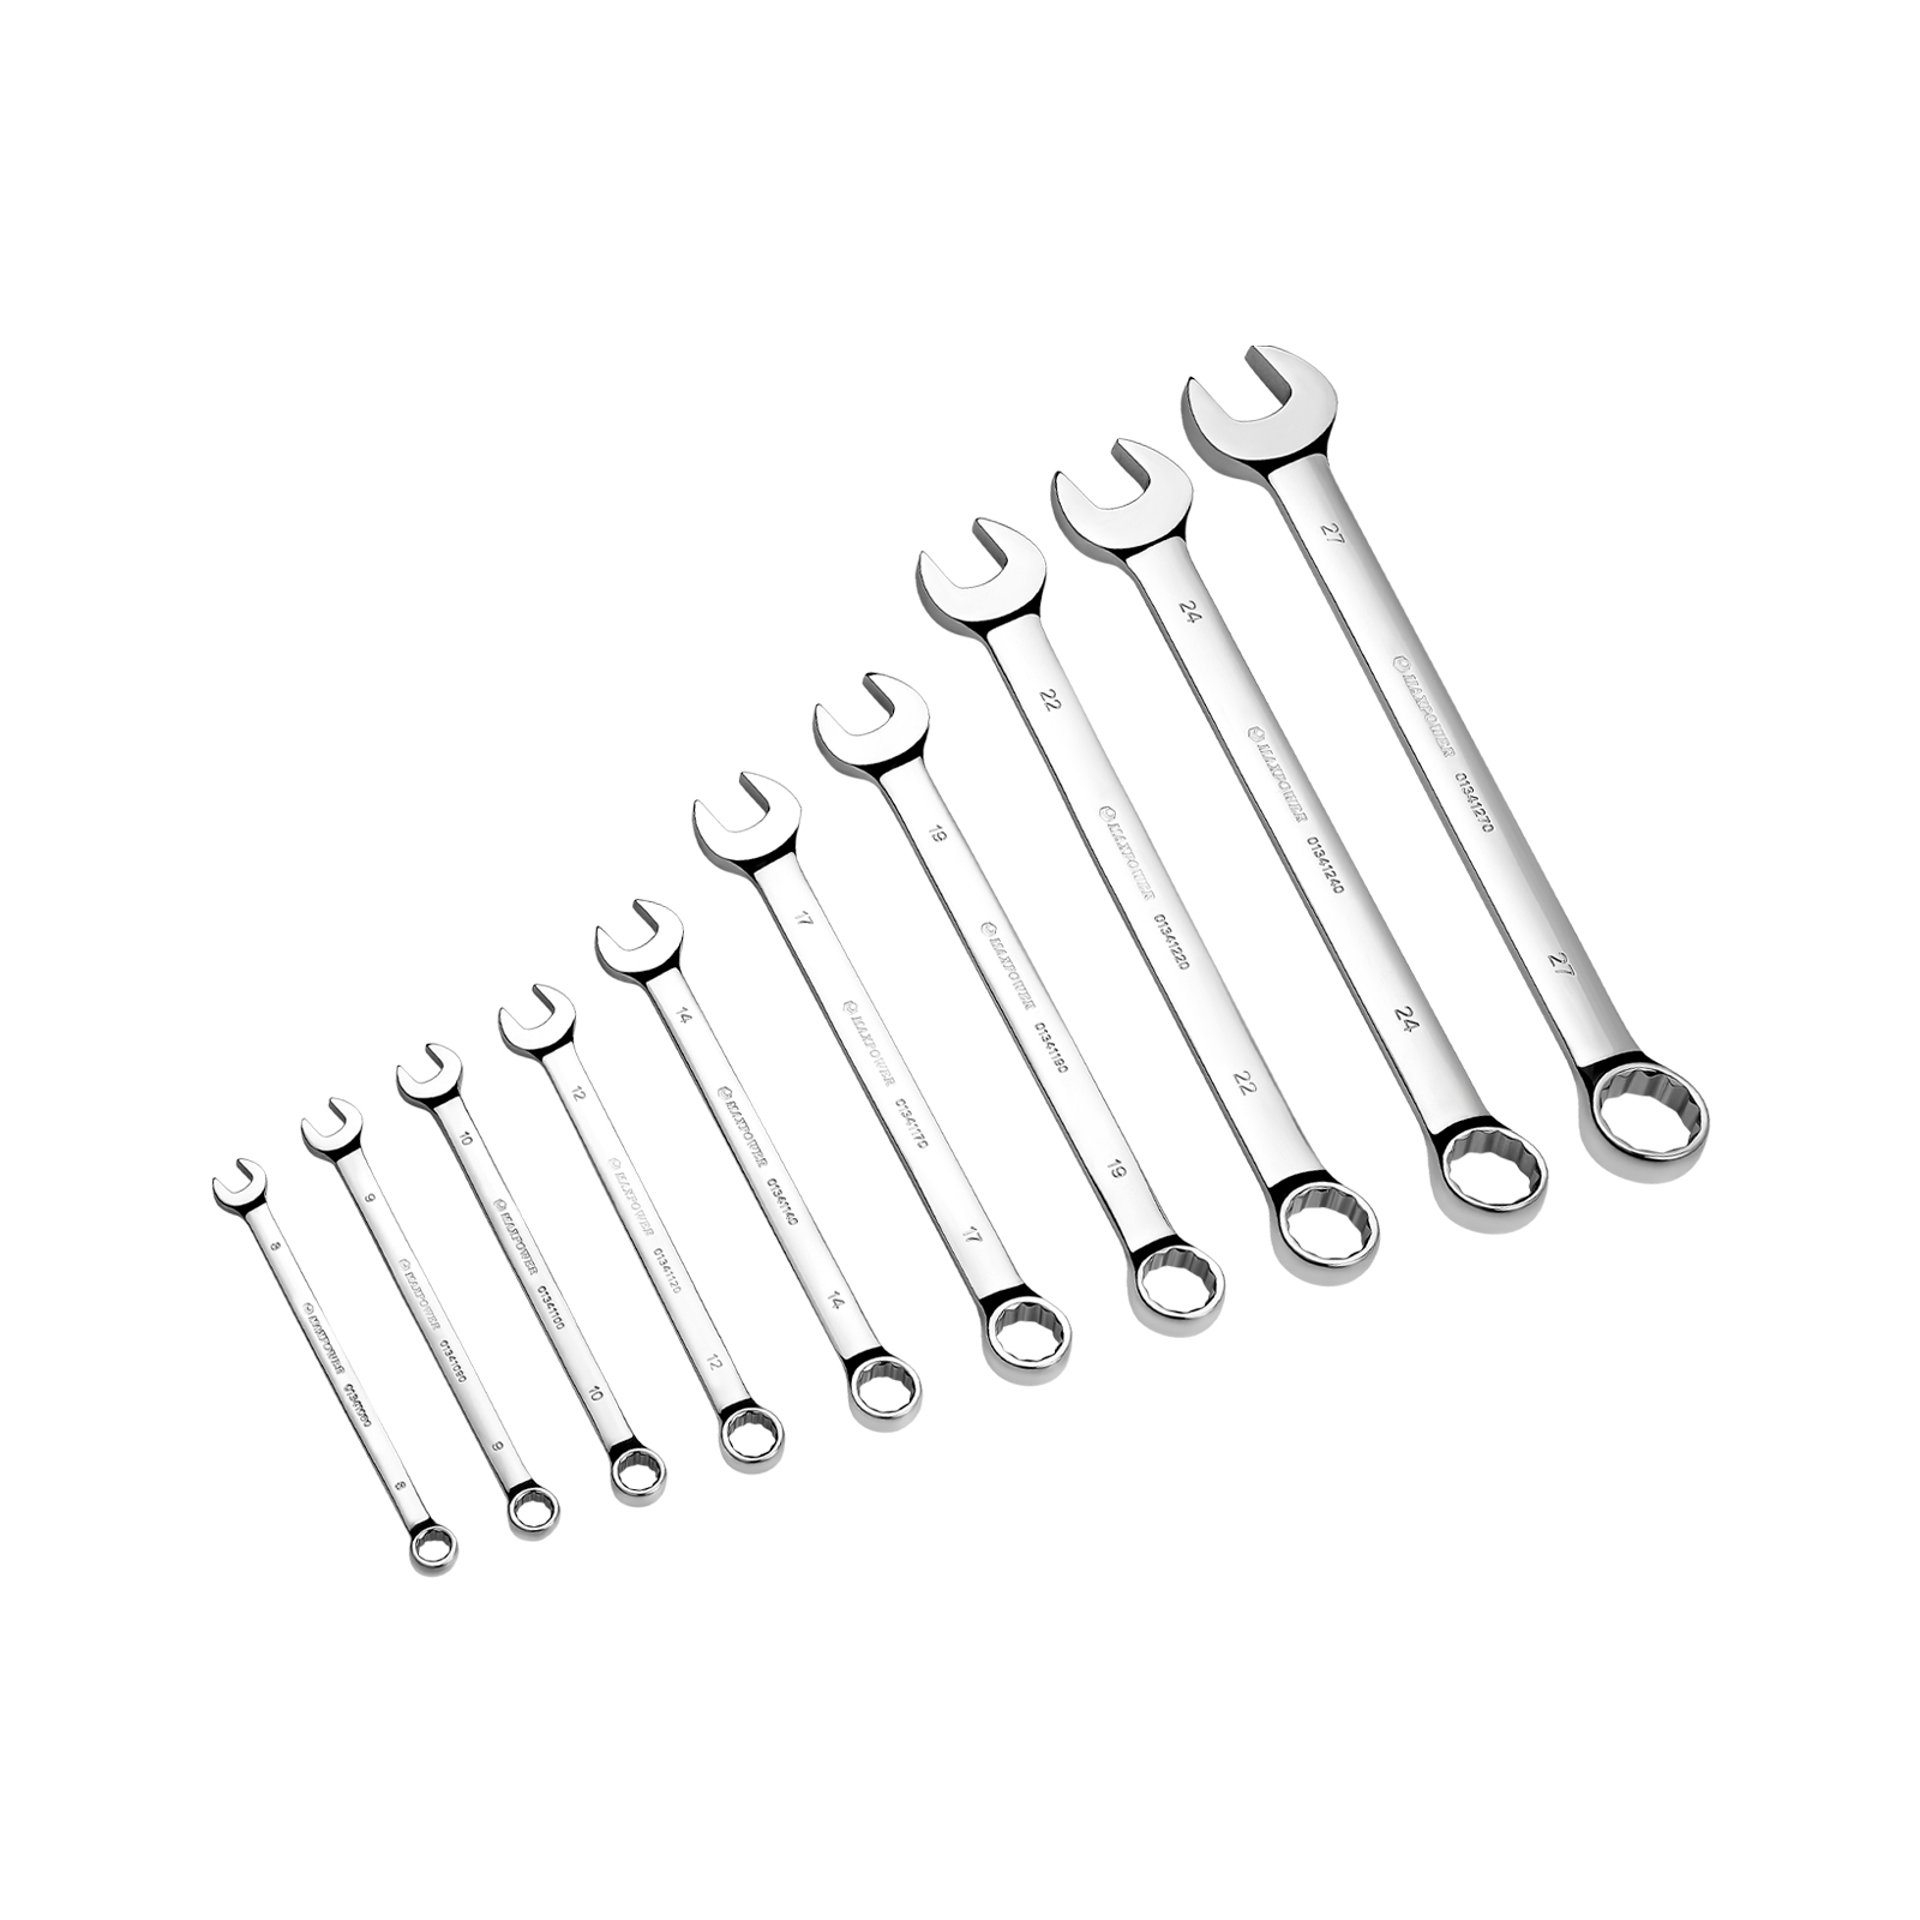 MAXPOWER 10-piece Metric Combination Wrench Set